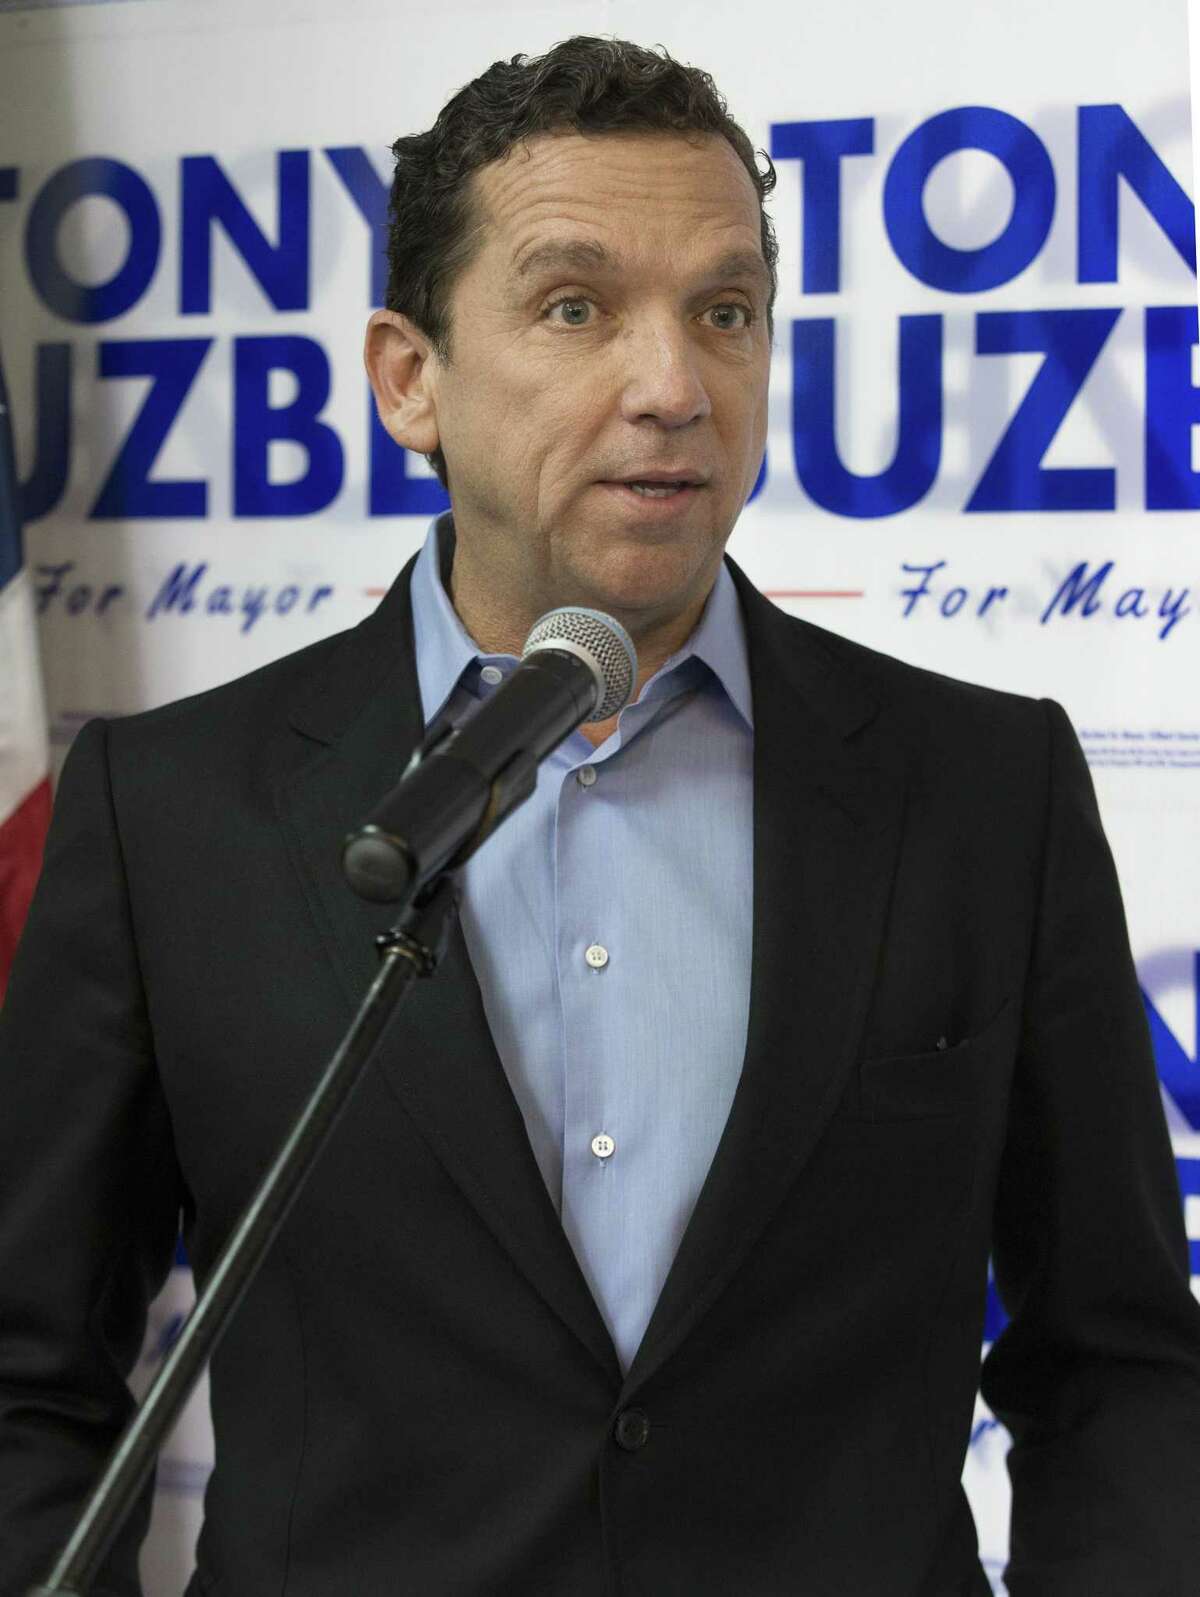 High-profile lawyer Tony Buzbee, shown her in January, is running for Houston Mayor, for whom he once hosted fundraiser.